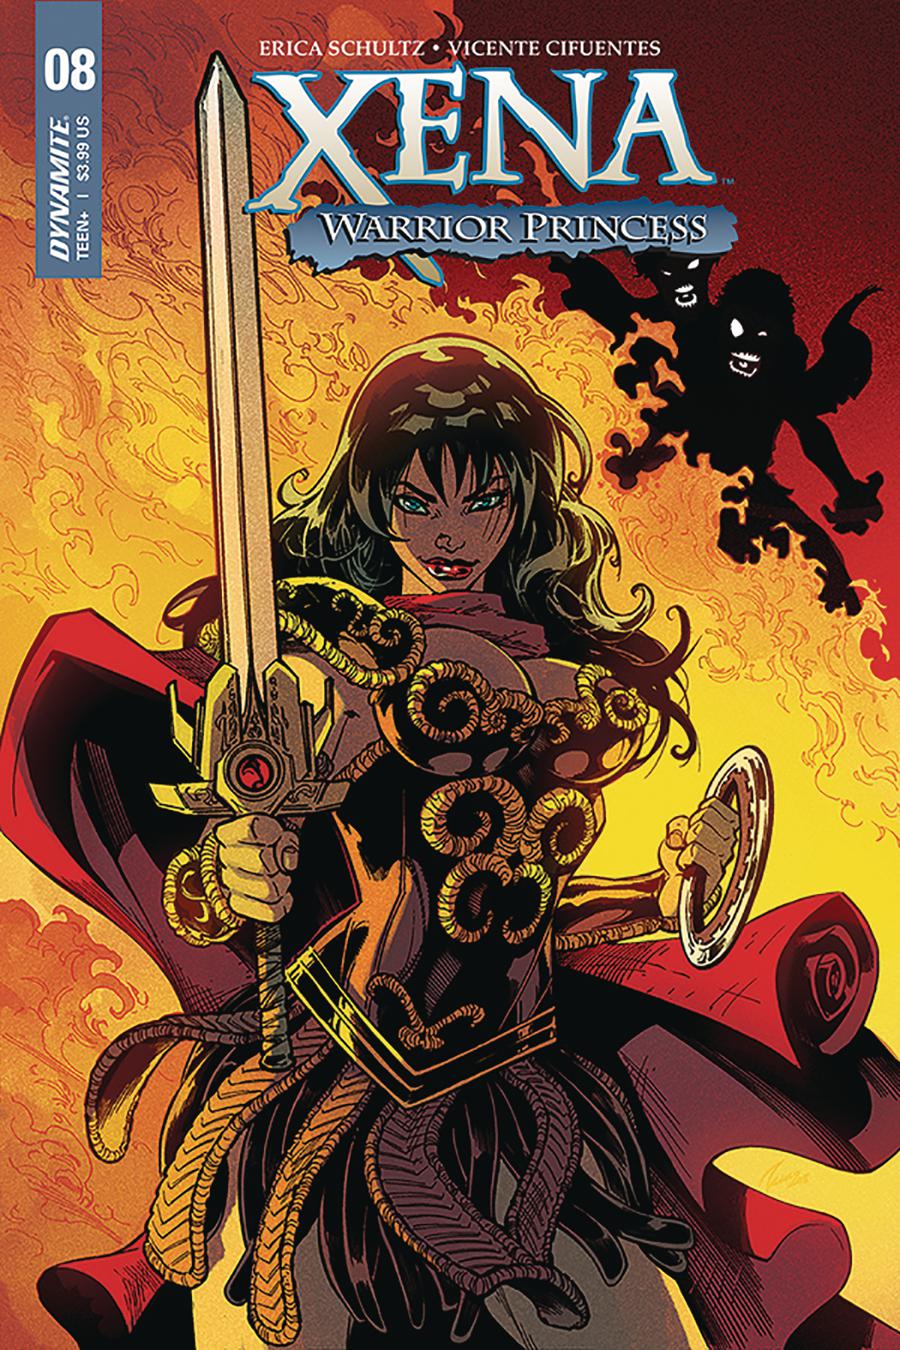 Xena Vol 2 #8 Cover B Variant Vicente Cifuentes Cover